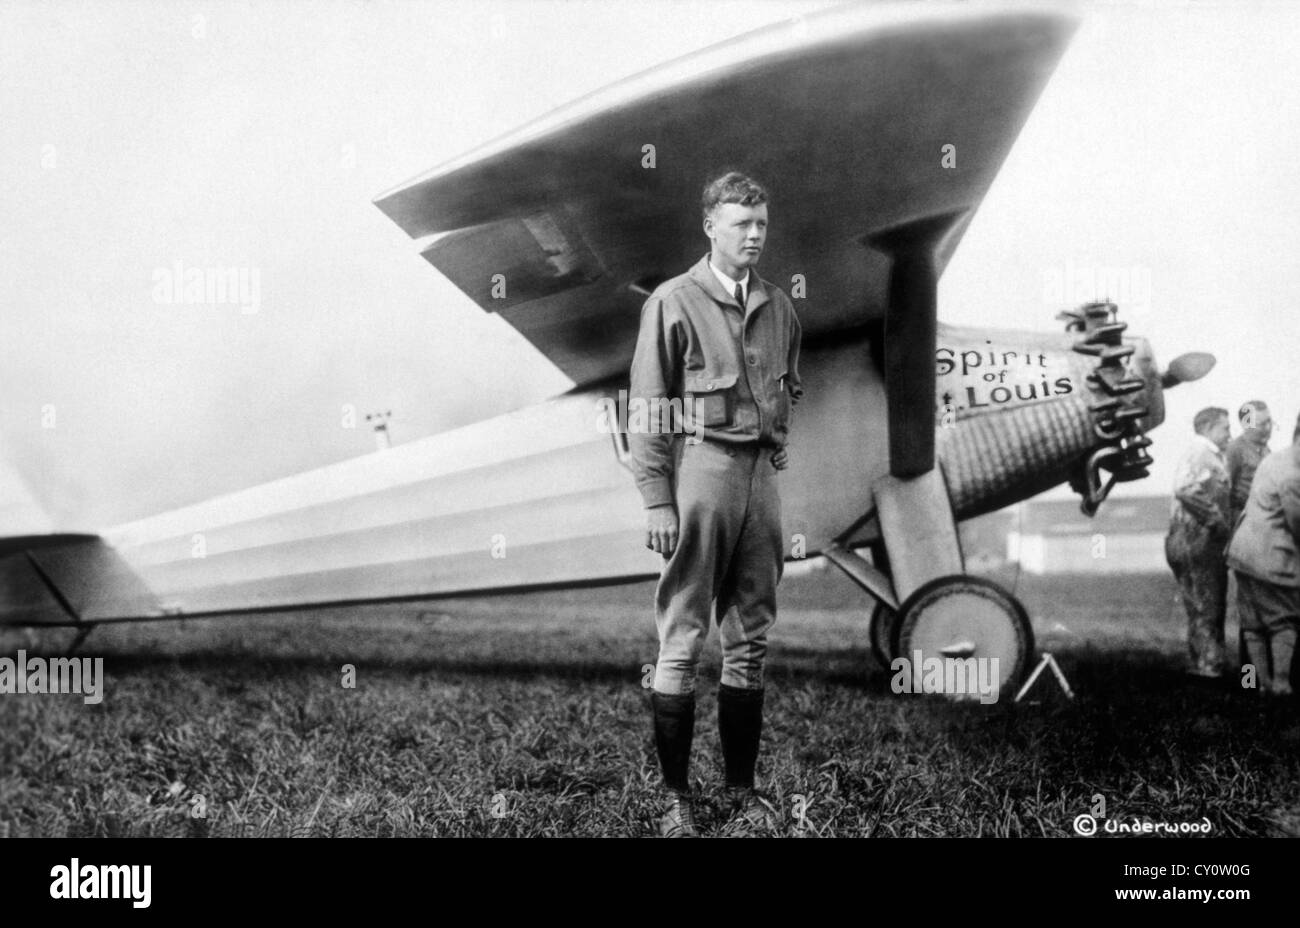 Charles A. Lindbergh with Spirit of St.Louis Airplane, May 1927 Stock Photo